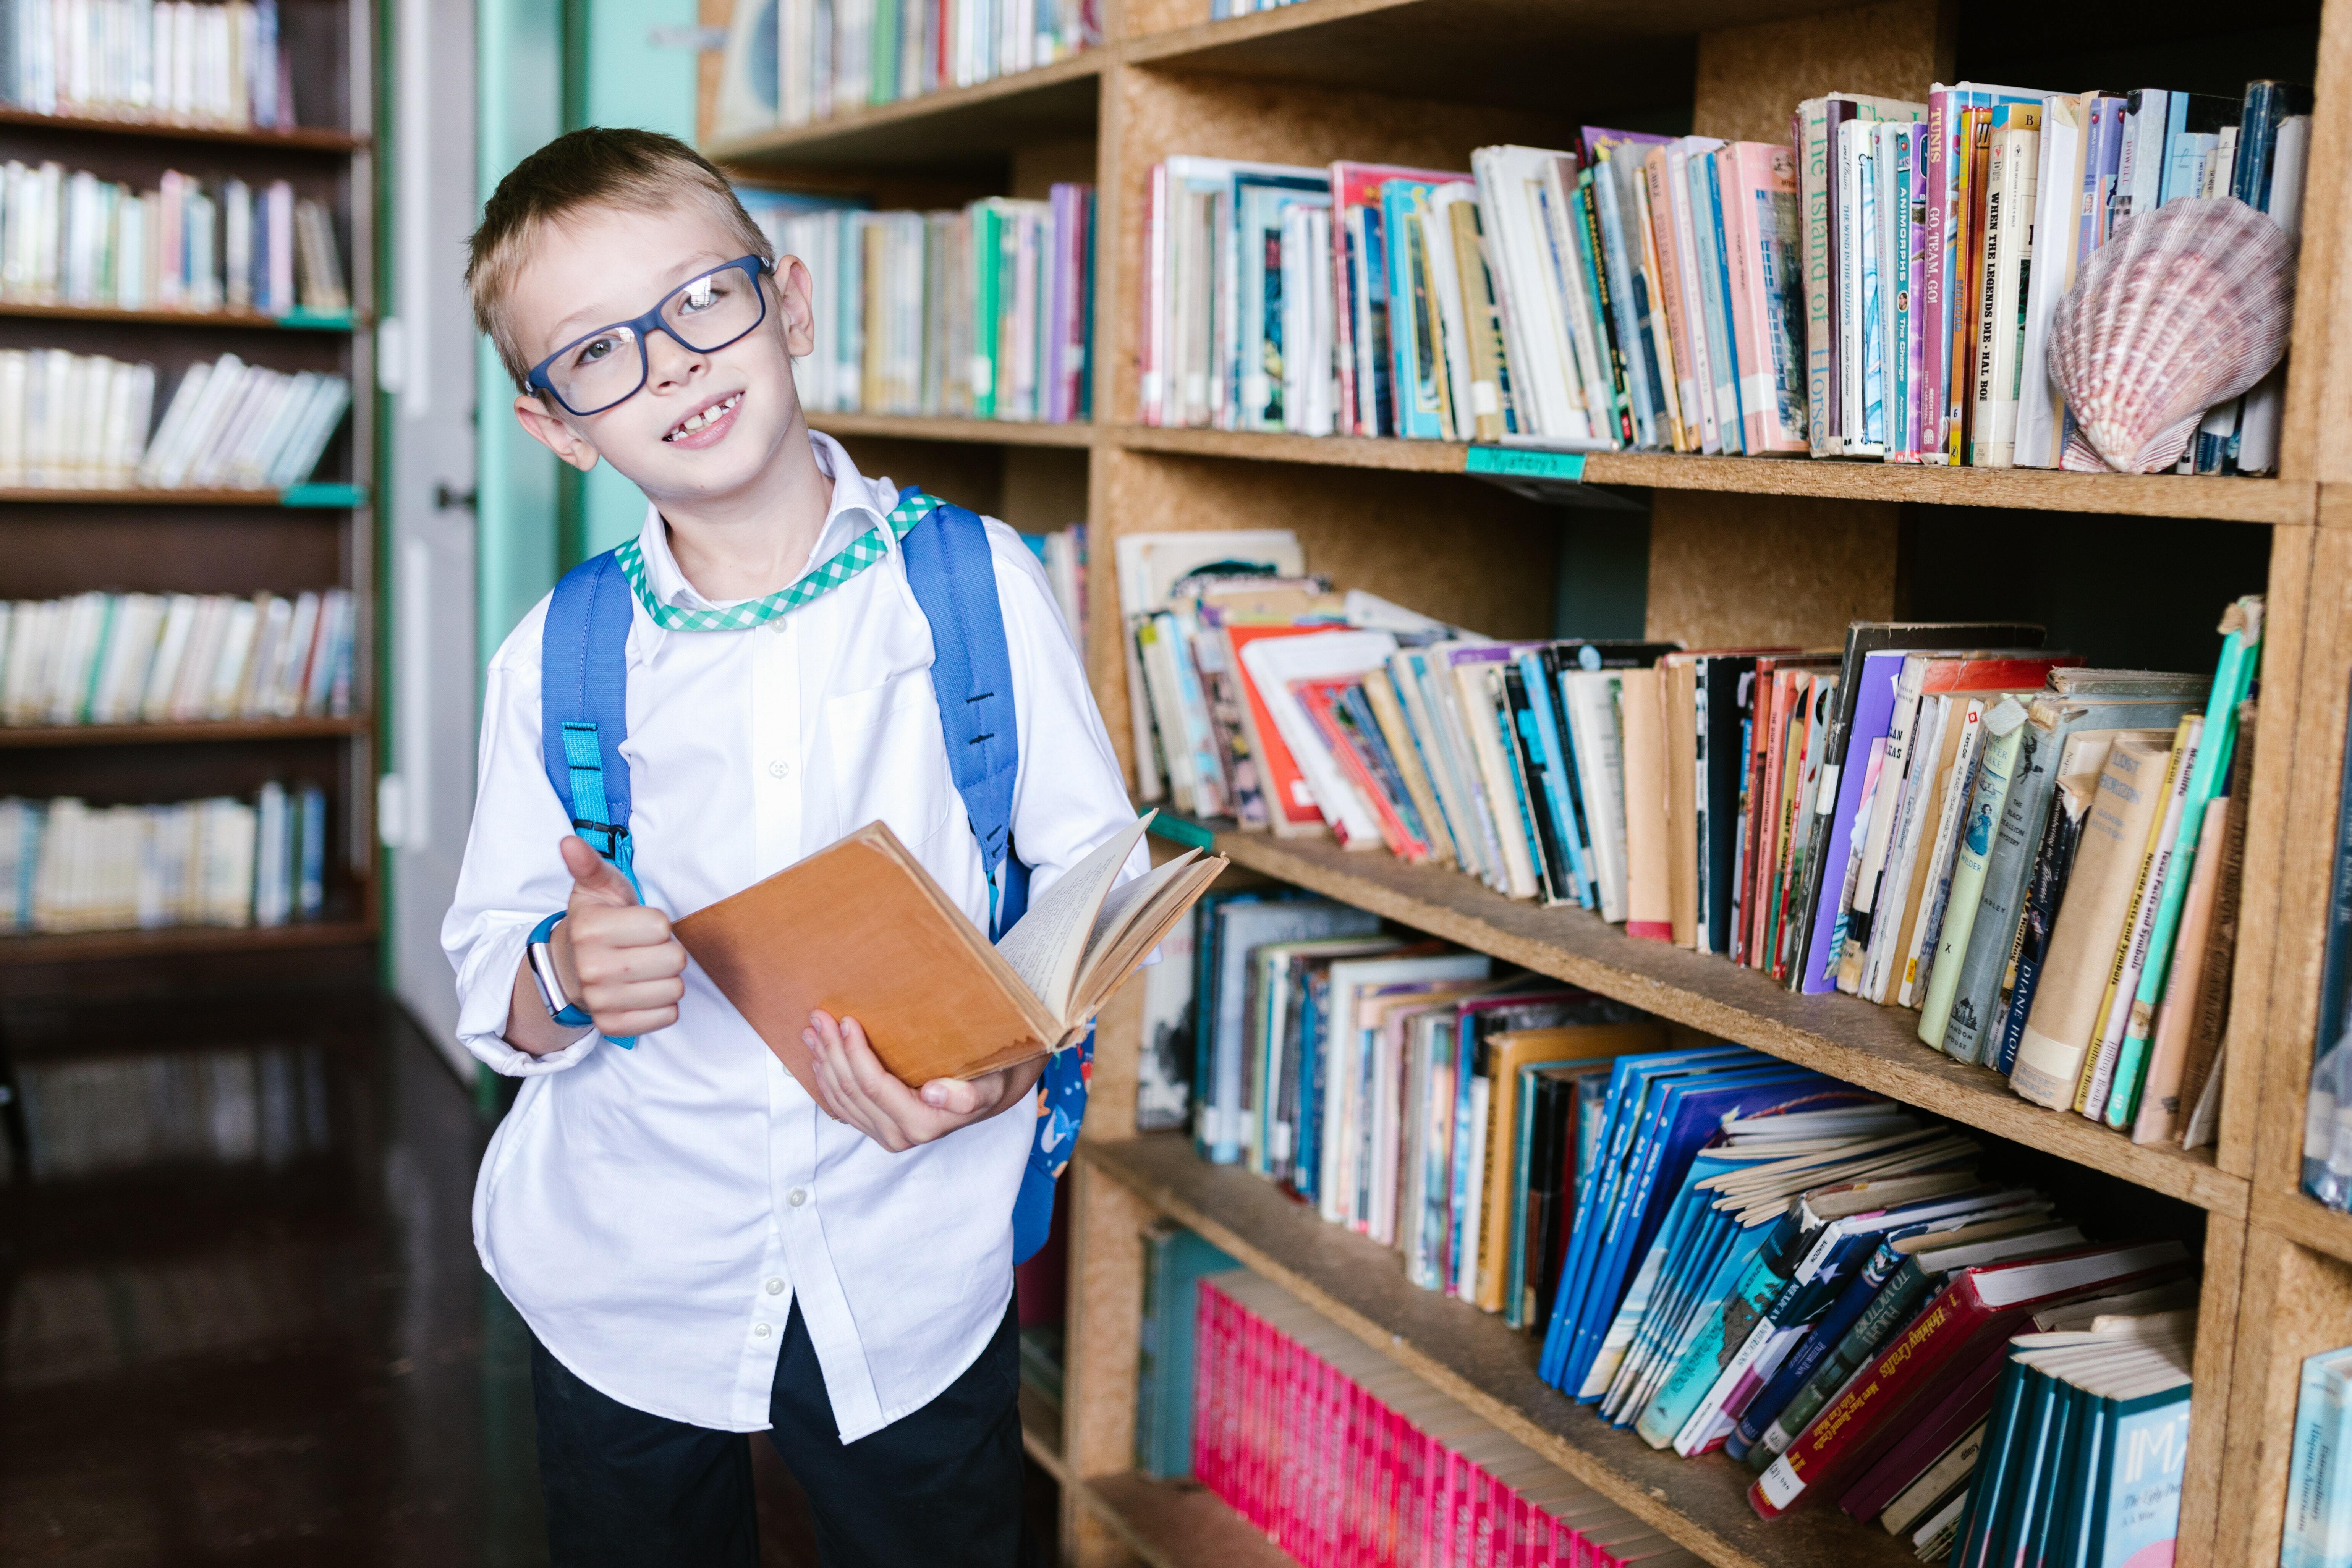 A boy holding a book in a library while standing